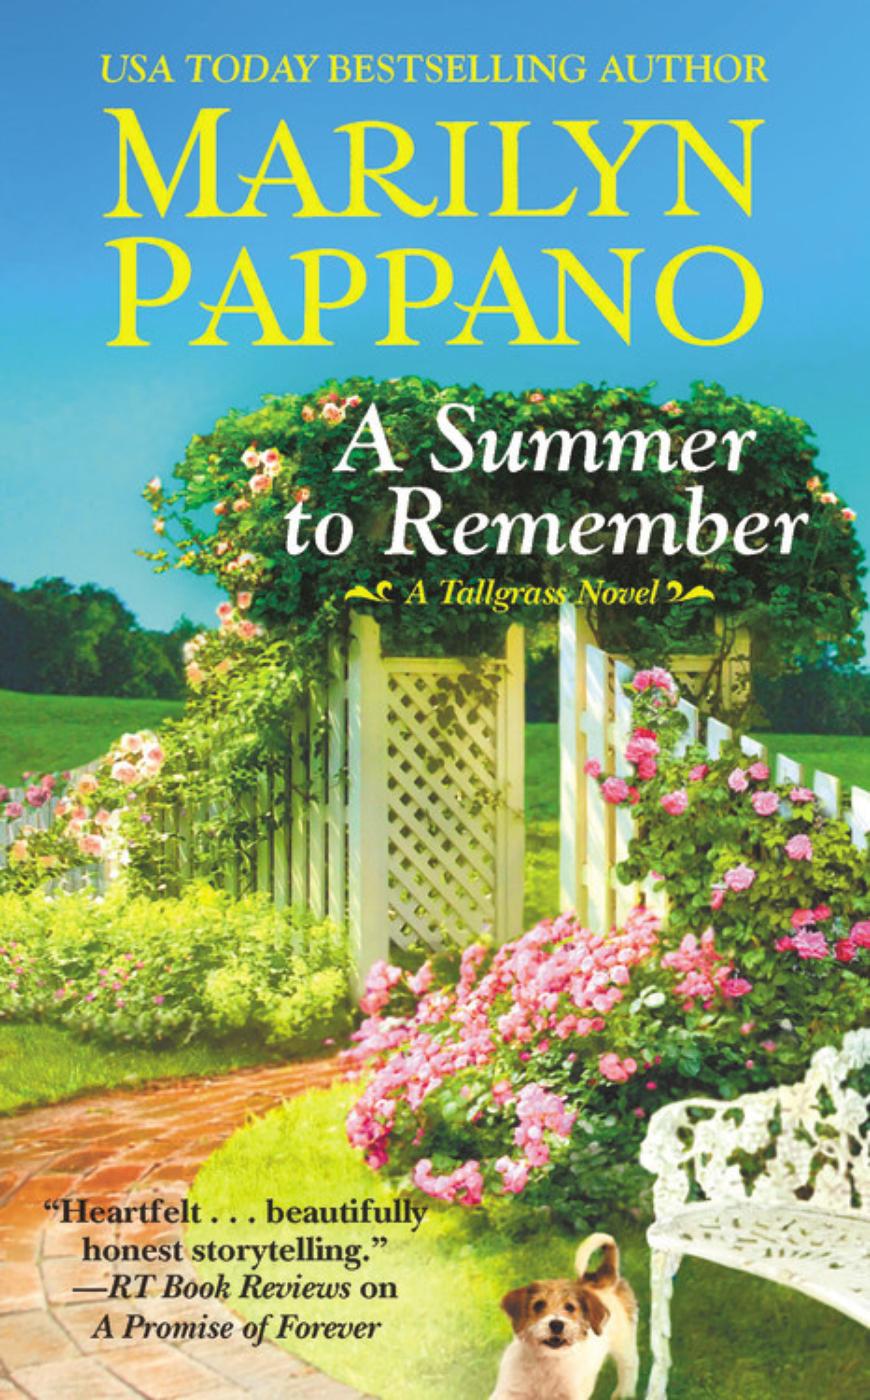 A Summer to Remember (2016) by Marilyn Pappano